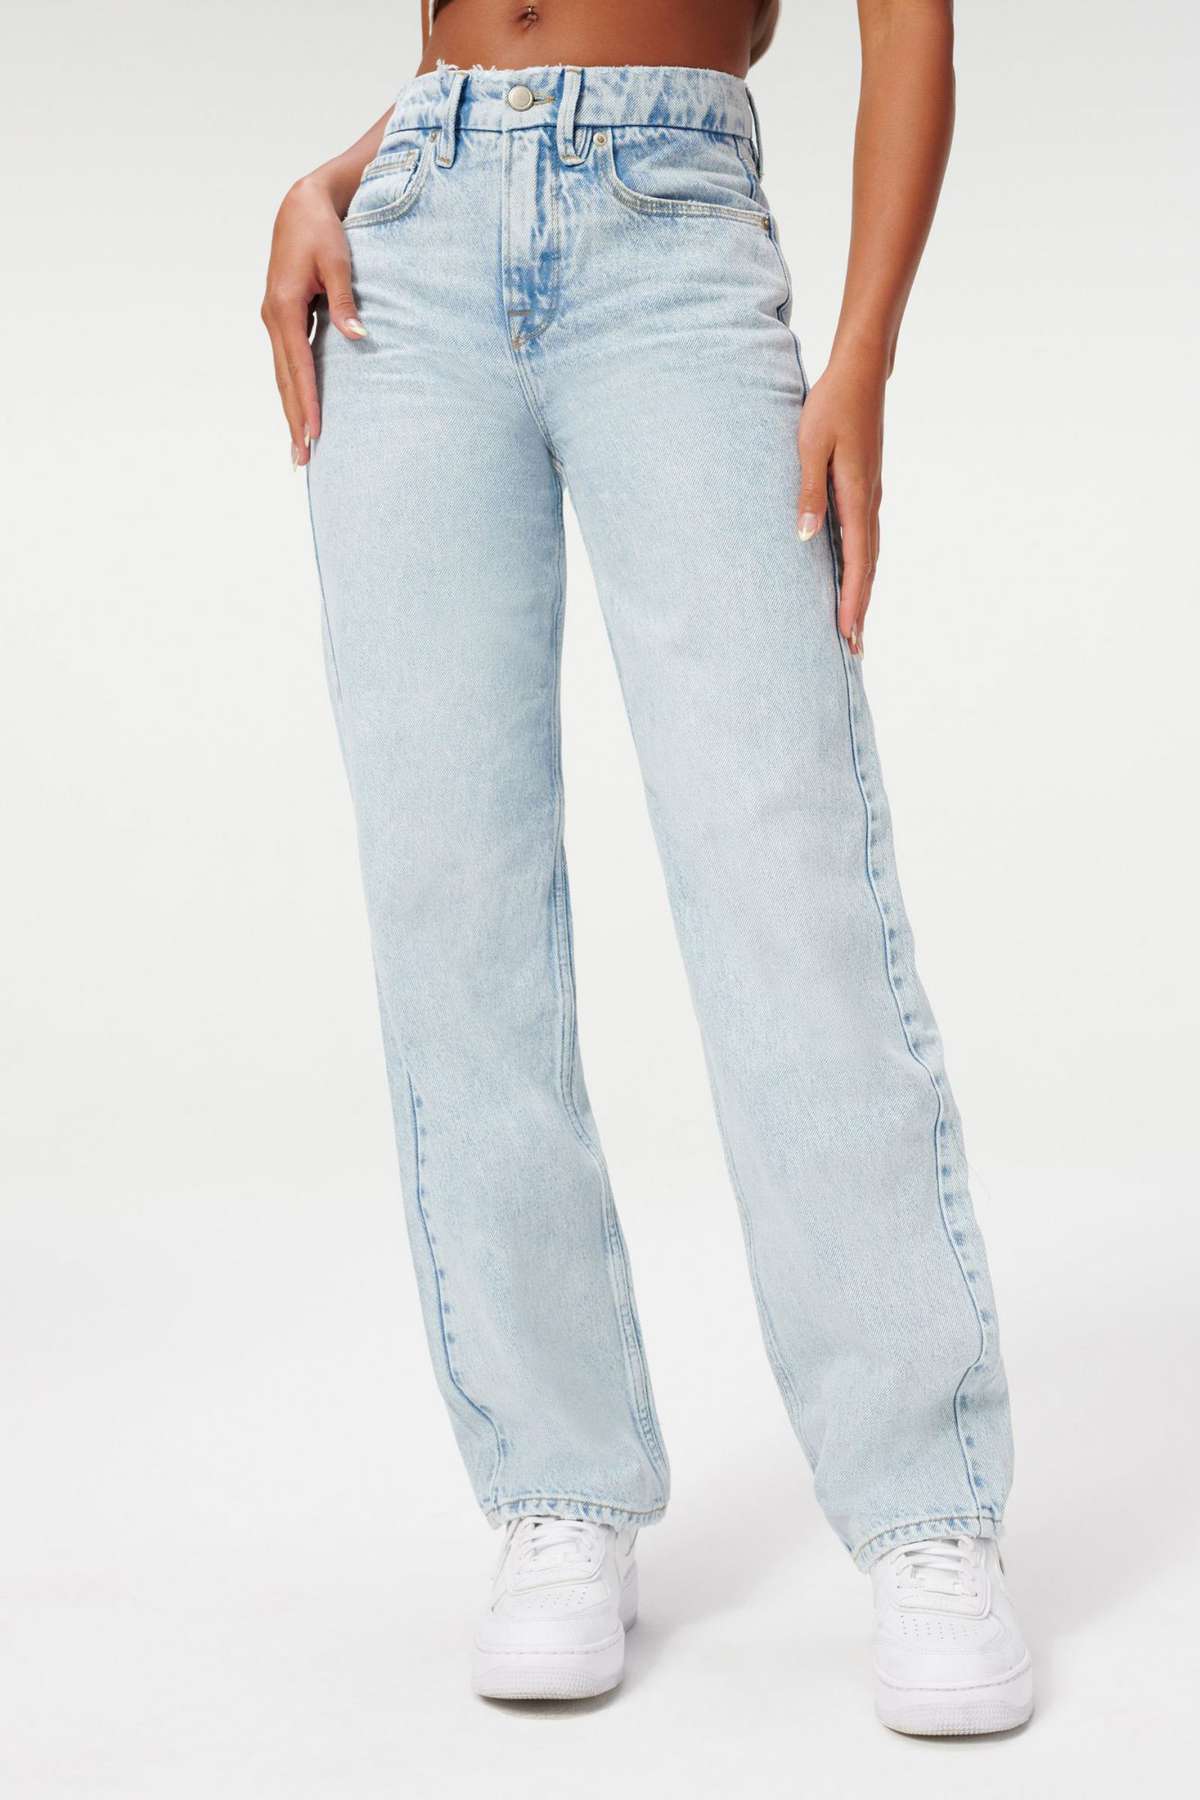 The Jeans for Women with | InStyle